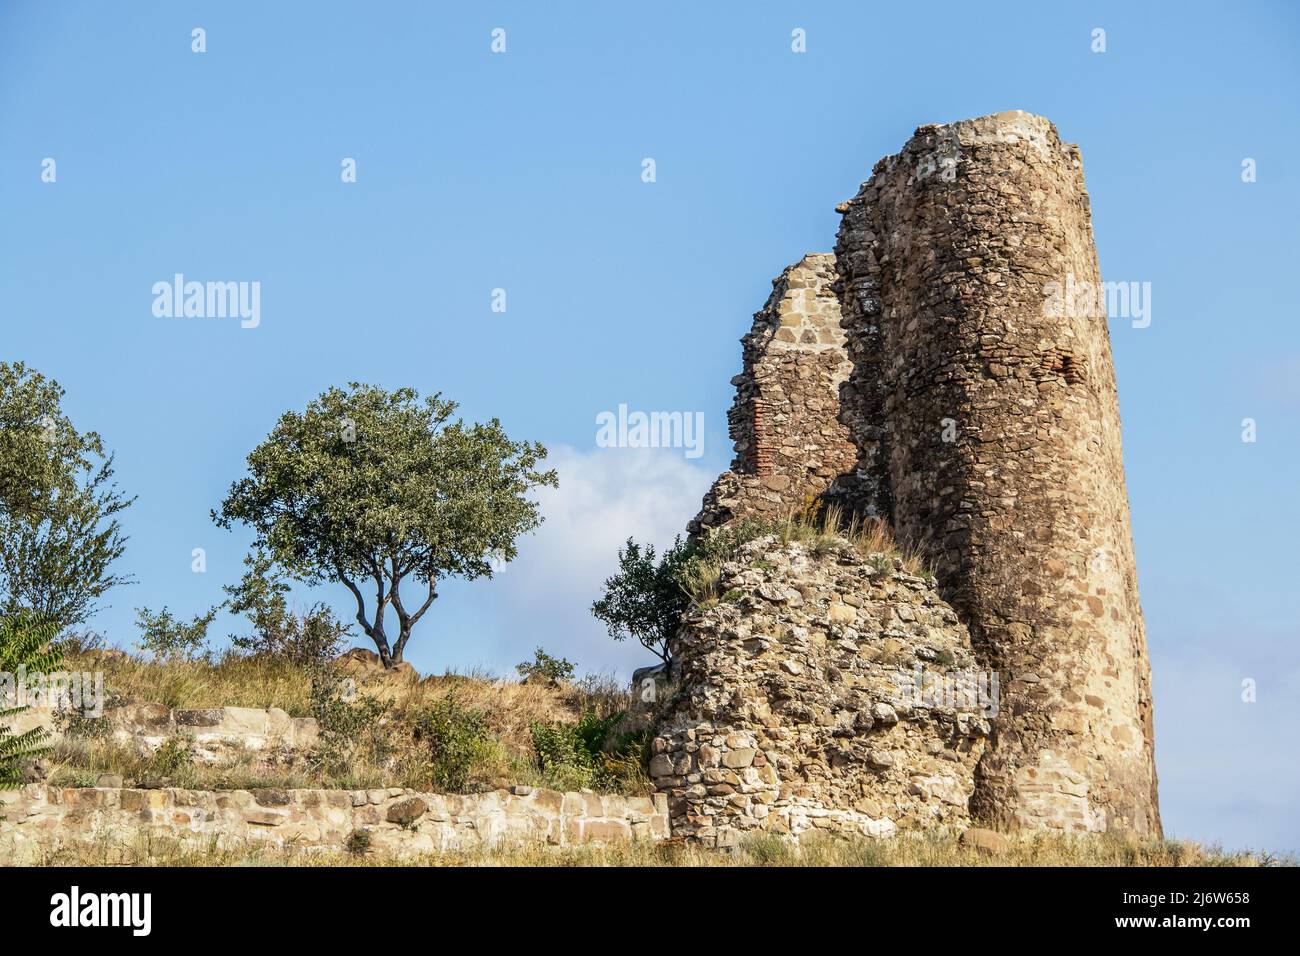 Old ruined tower in Eastern Europe - Part of 6th century Jvari Monastery in Mtskheta Georgia - one of oldest Christian Monasteries in the country Stock Photo